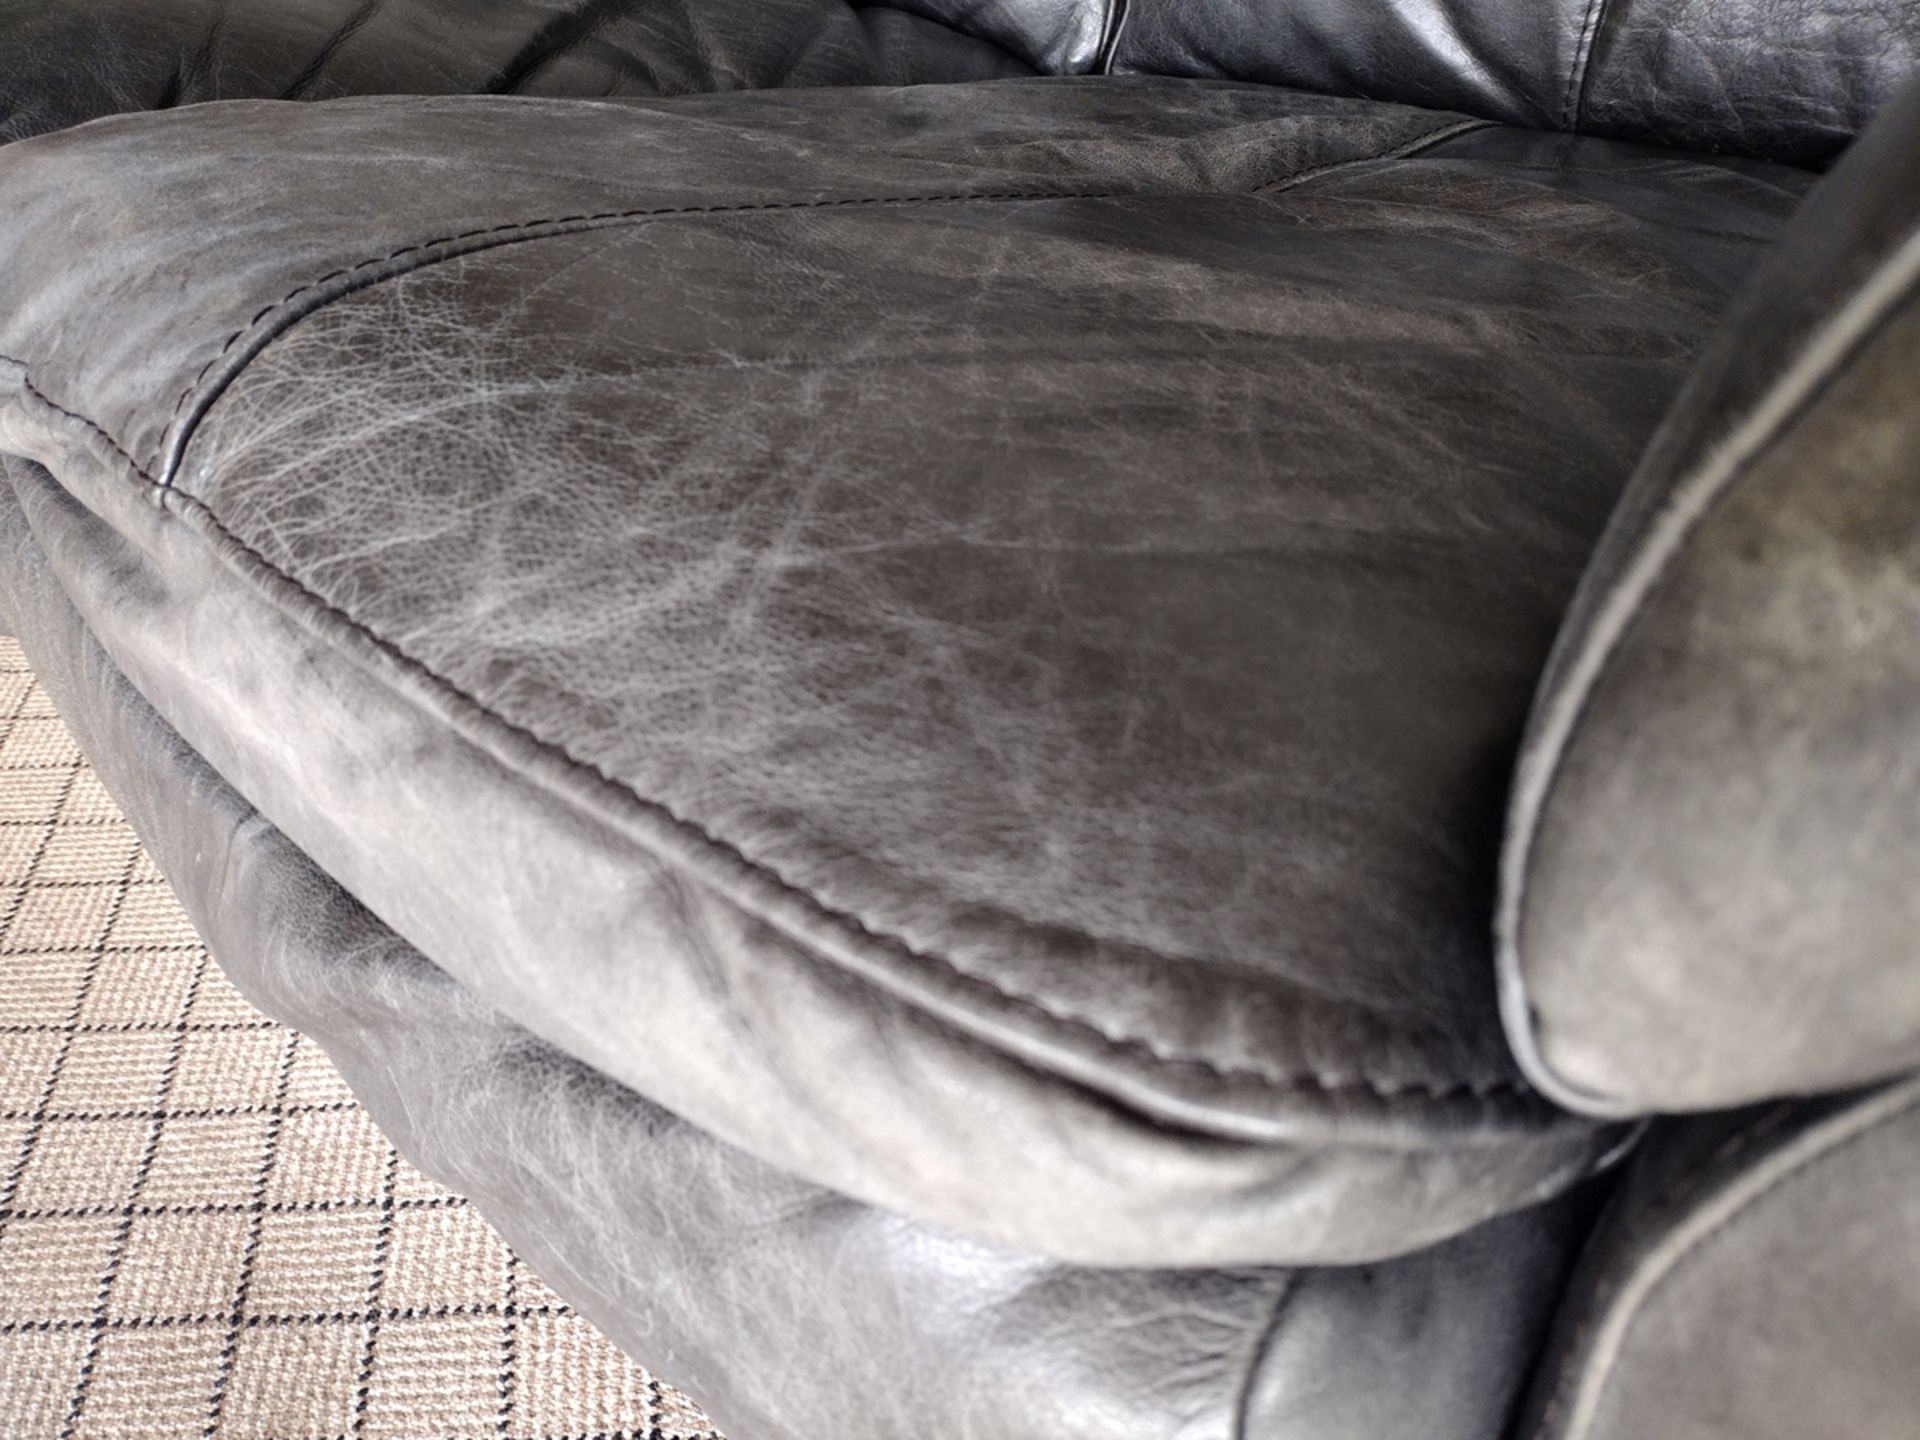 Leather Upholstered Sofa - Image 3 of 3